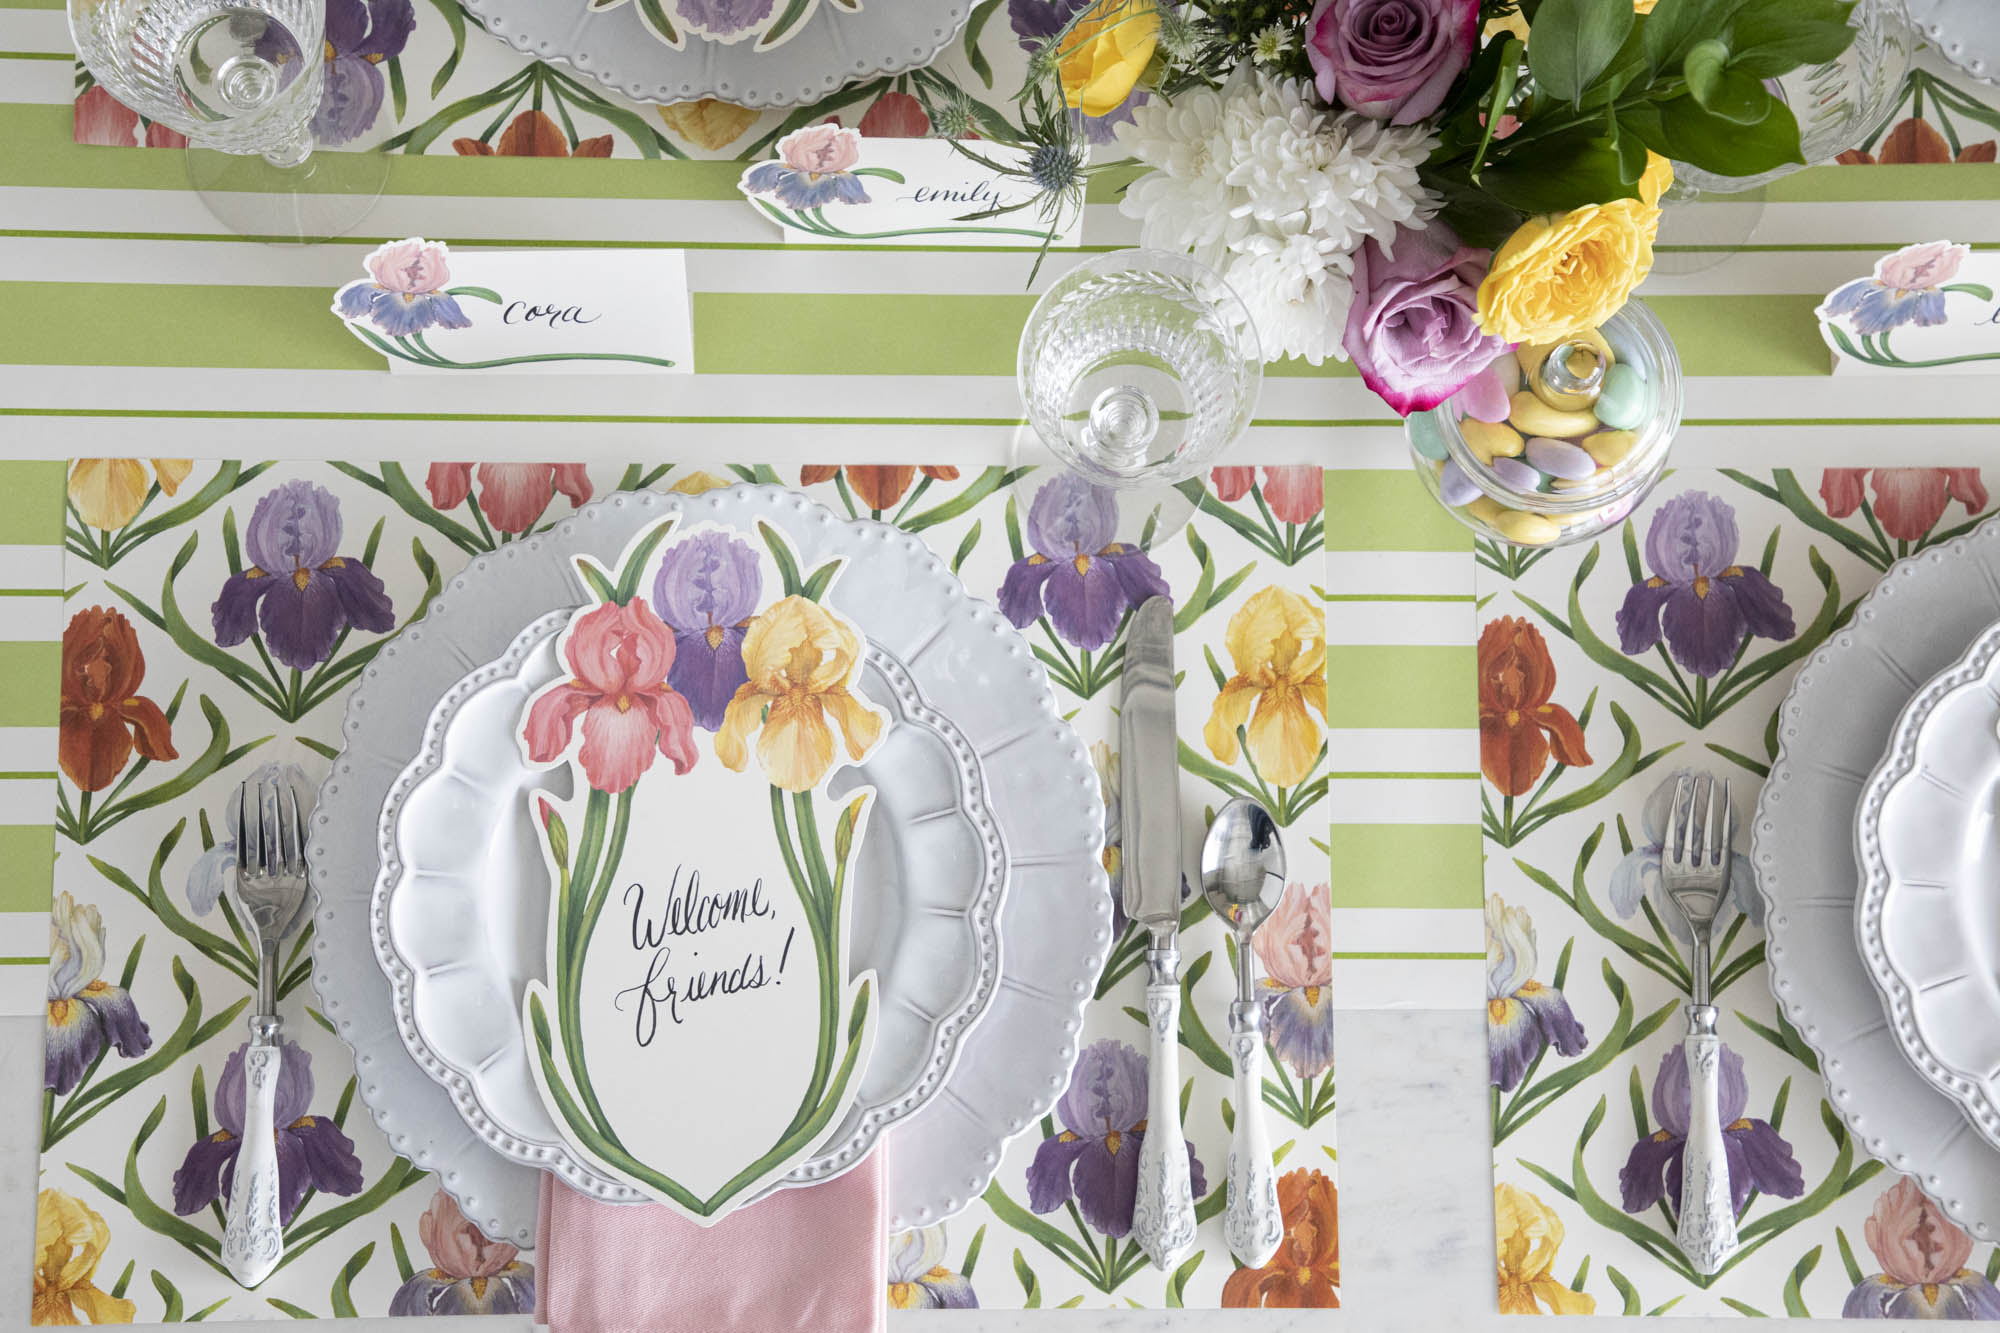 Top-down view of an elegant floral place setting featuring an Iris Table Card with &quot;Welcome, friends!&quot; written on it in beautiful script resting on the plate.